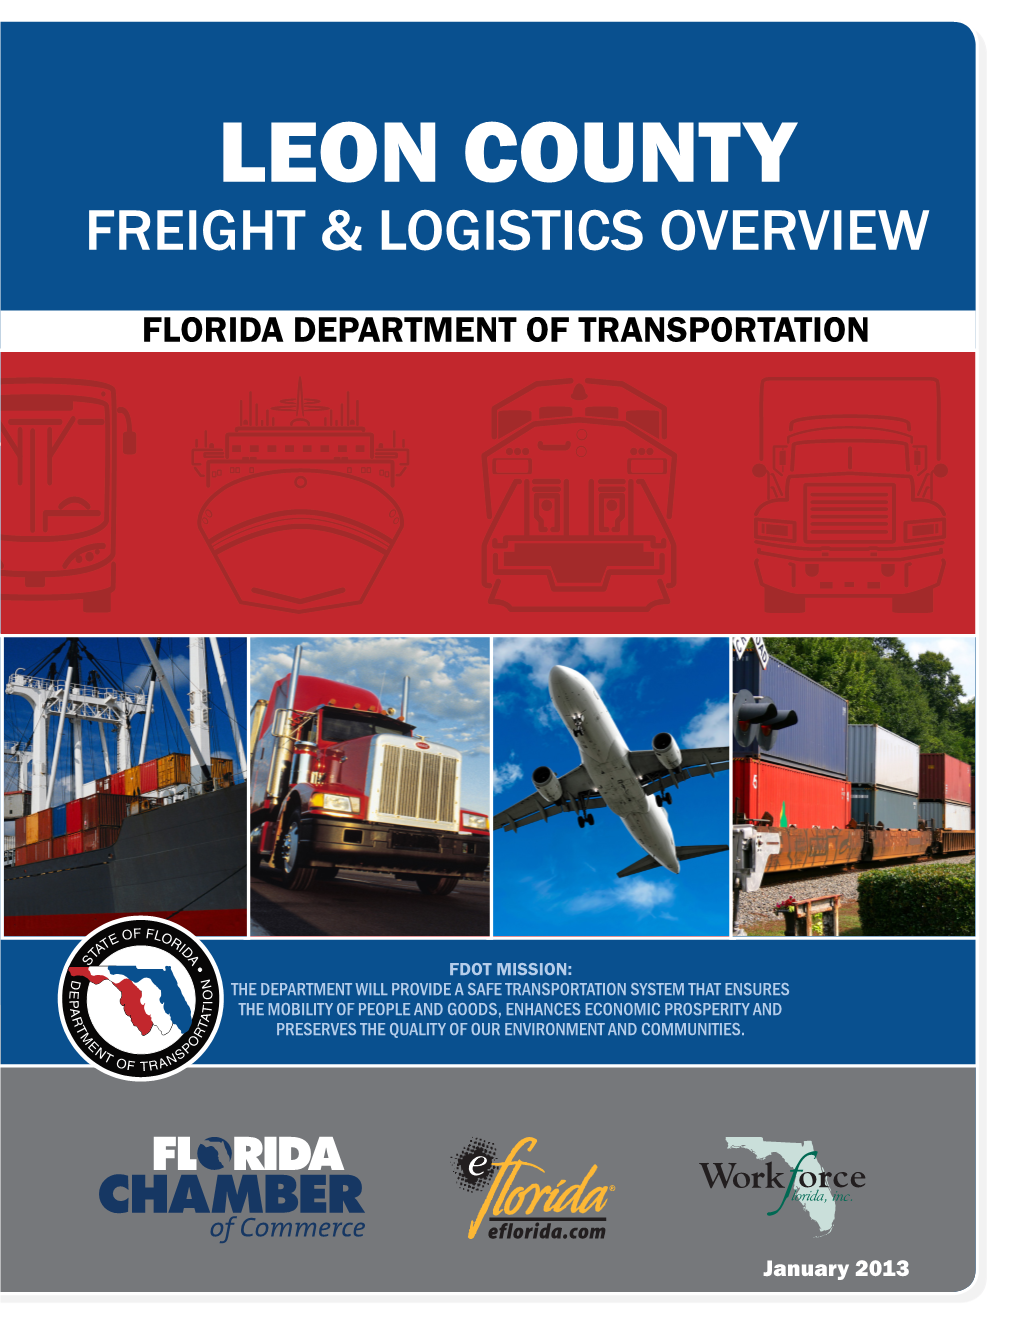 Leon County Freight & Logistics Overview